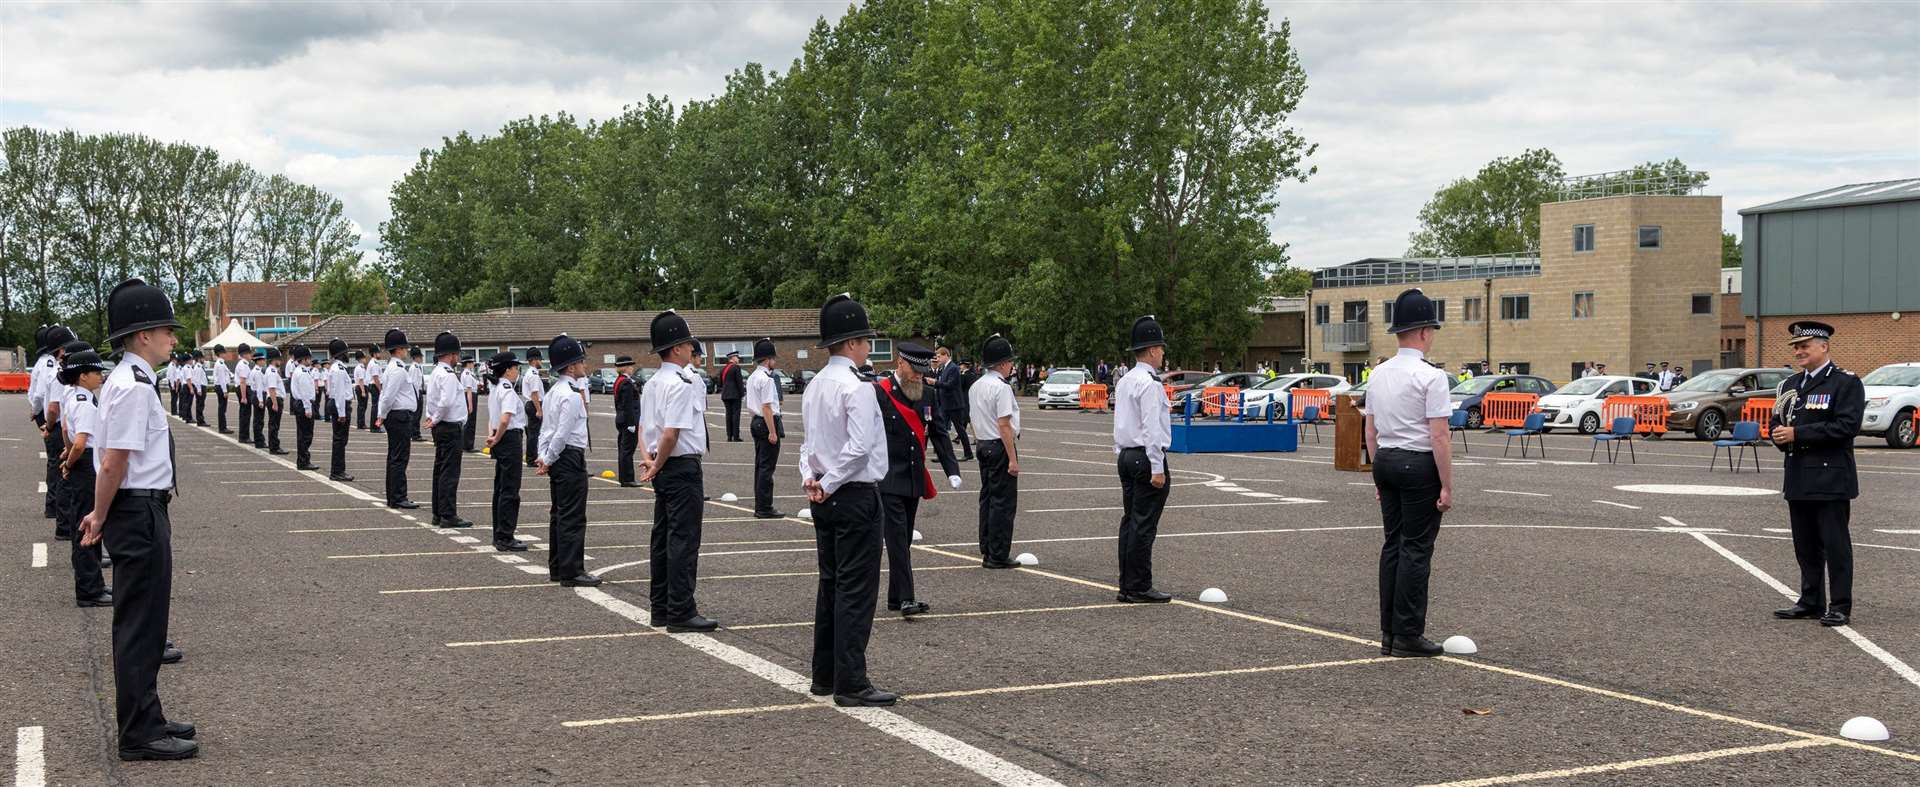 The 55 new recruits can now start their duties